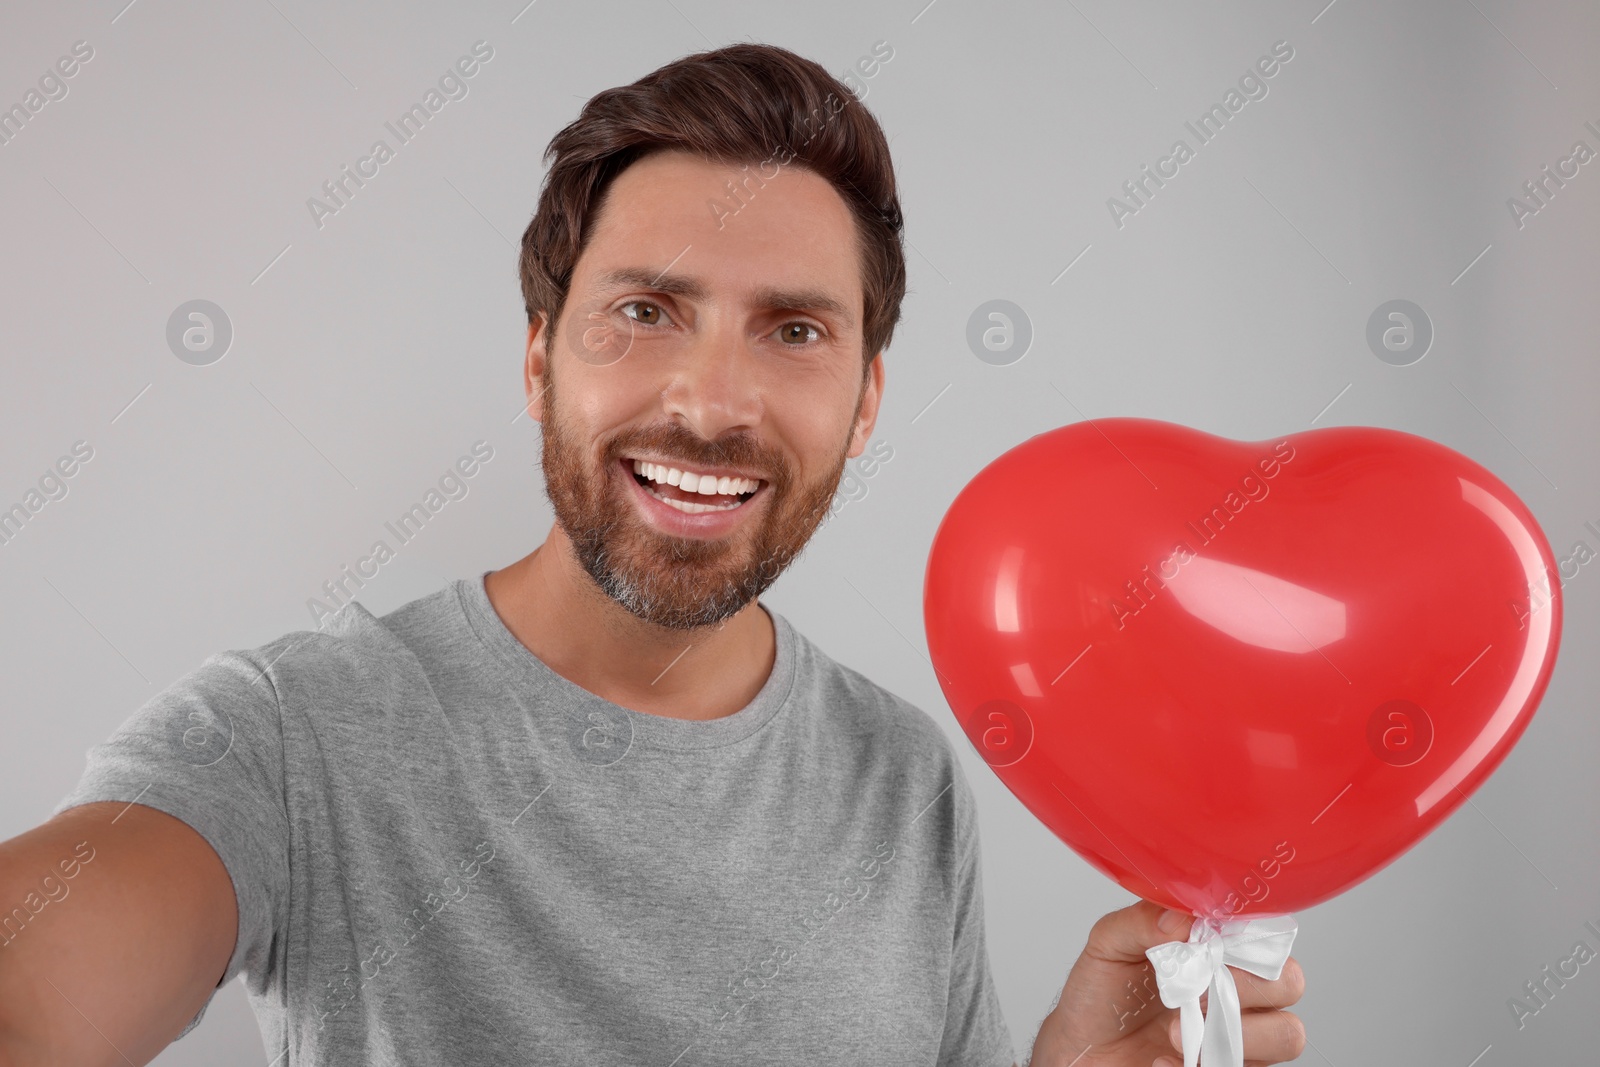 Photo of Happy man holding red heart shaped balloon and taking selfie on grey background